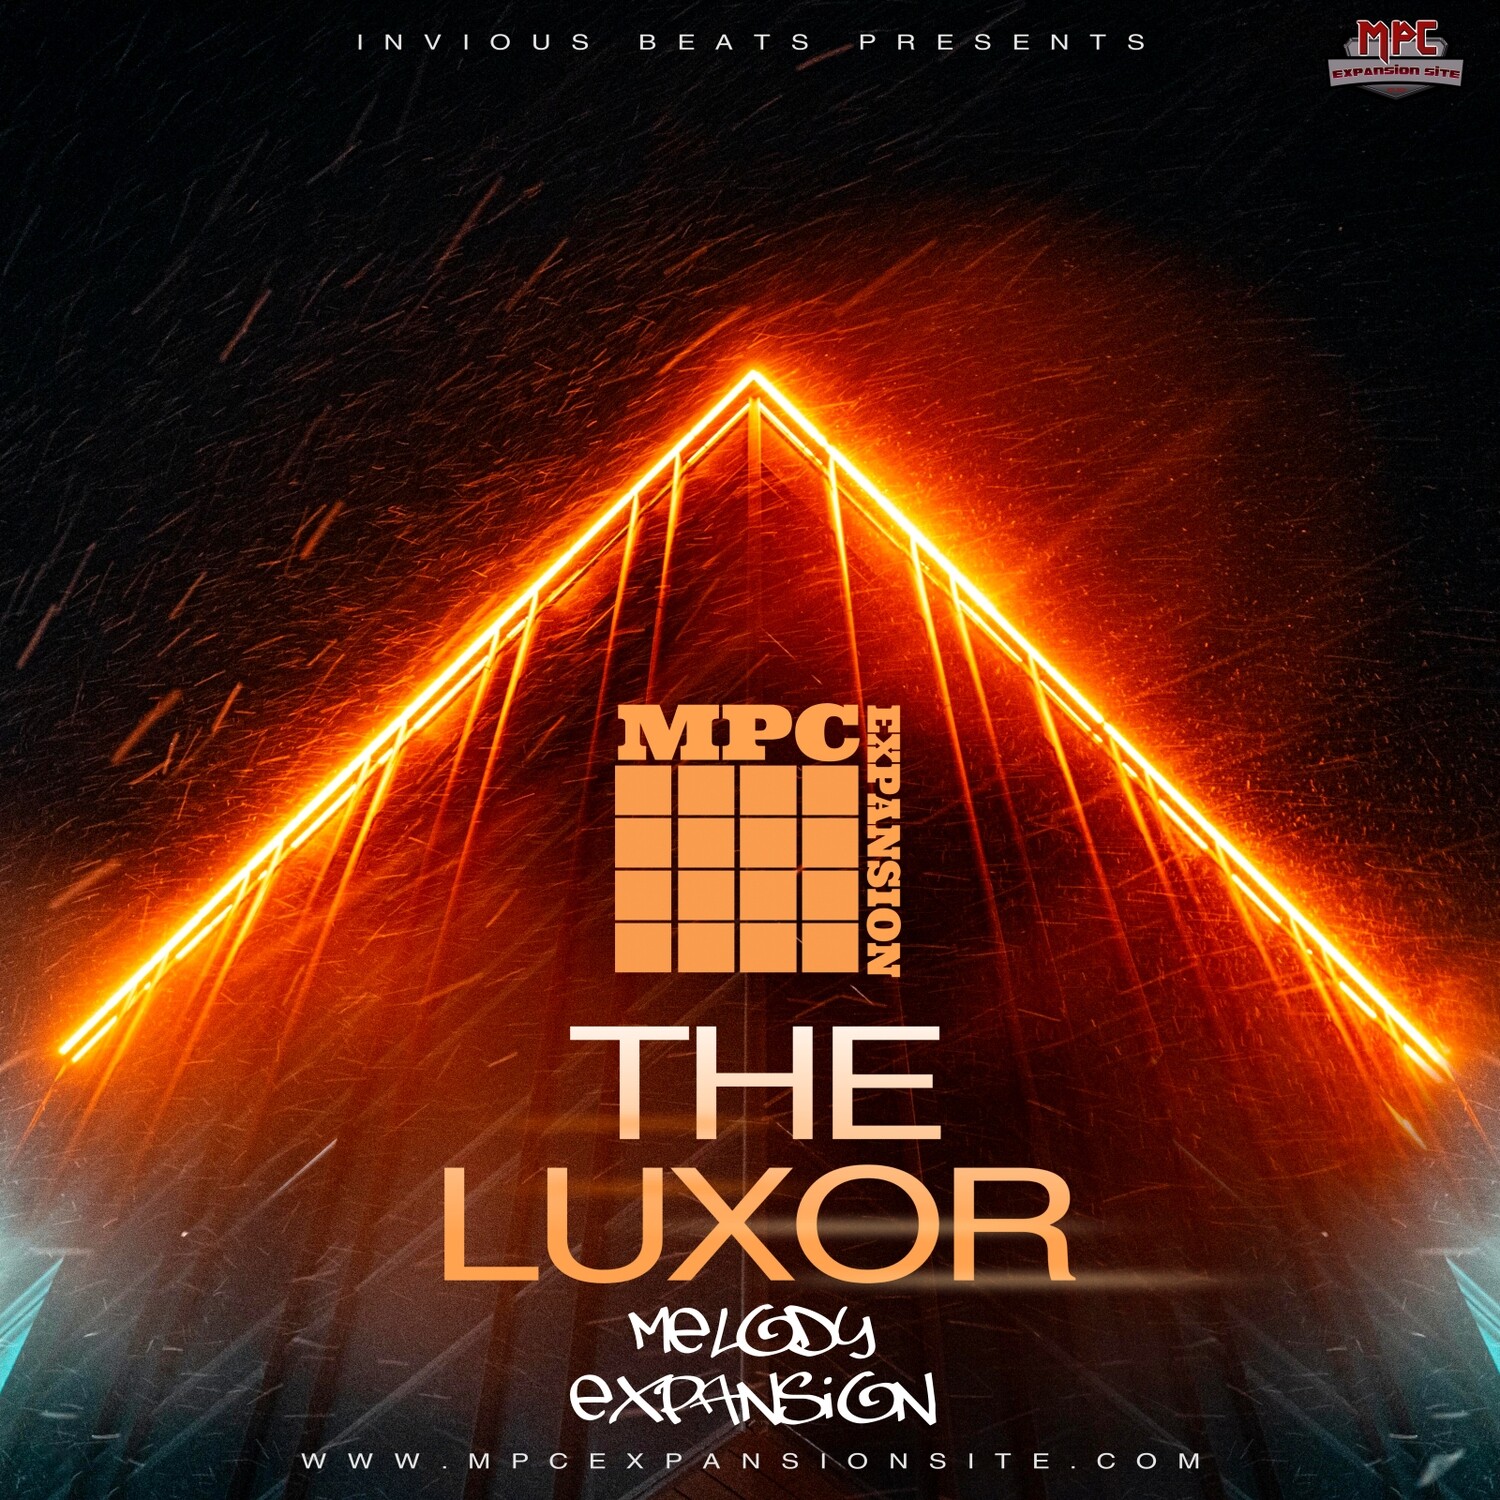 MPC EXPANSION 'THE LUXOR' by INVIOUS